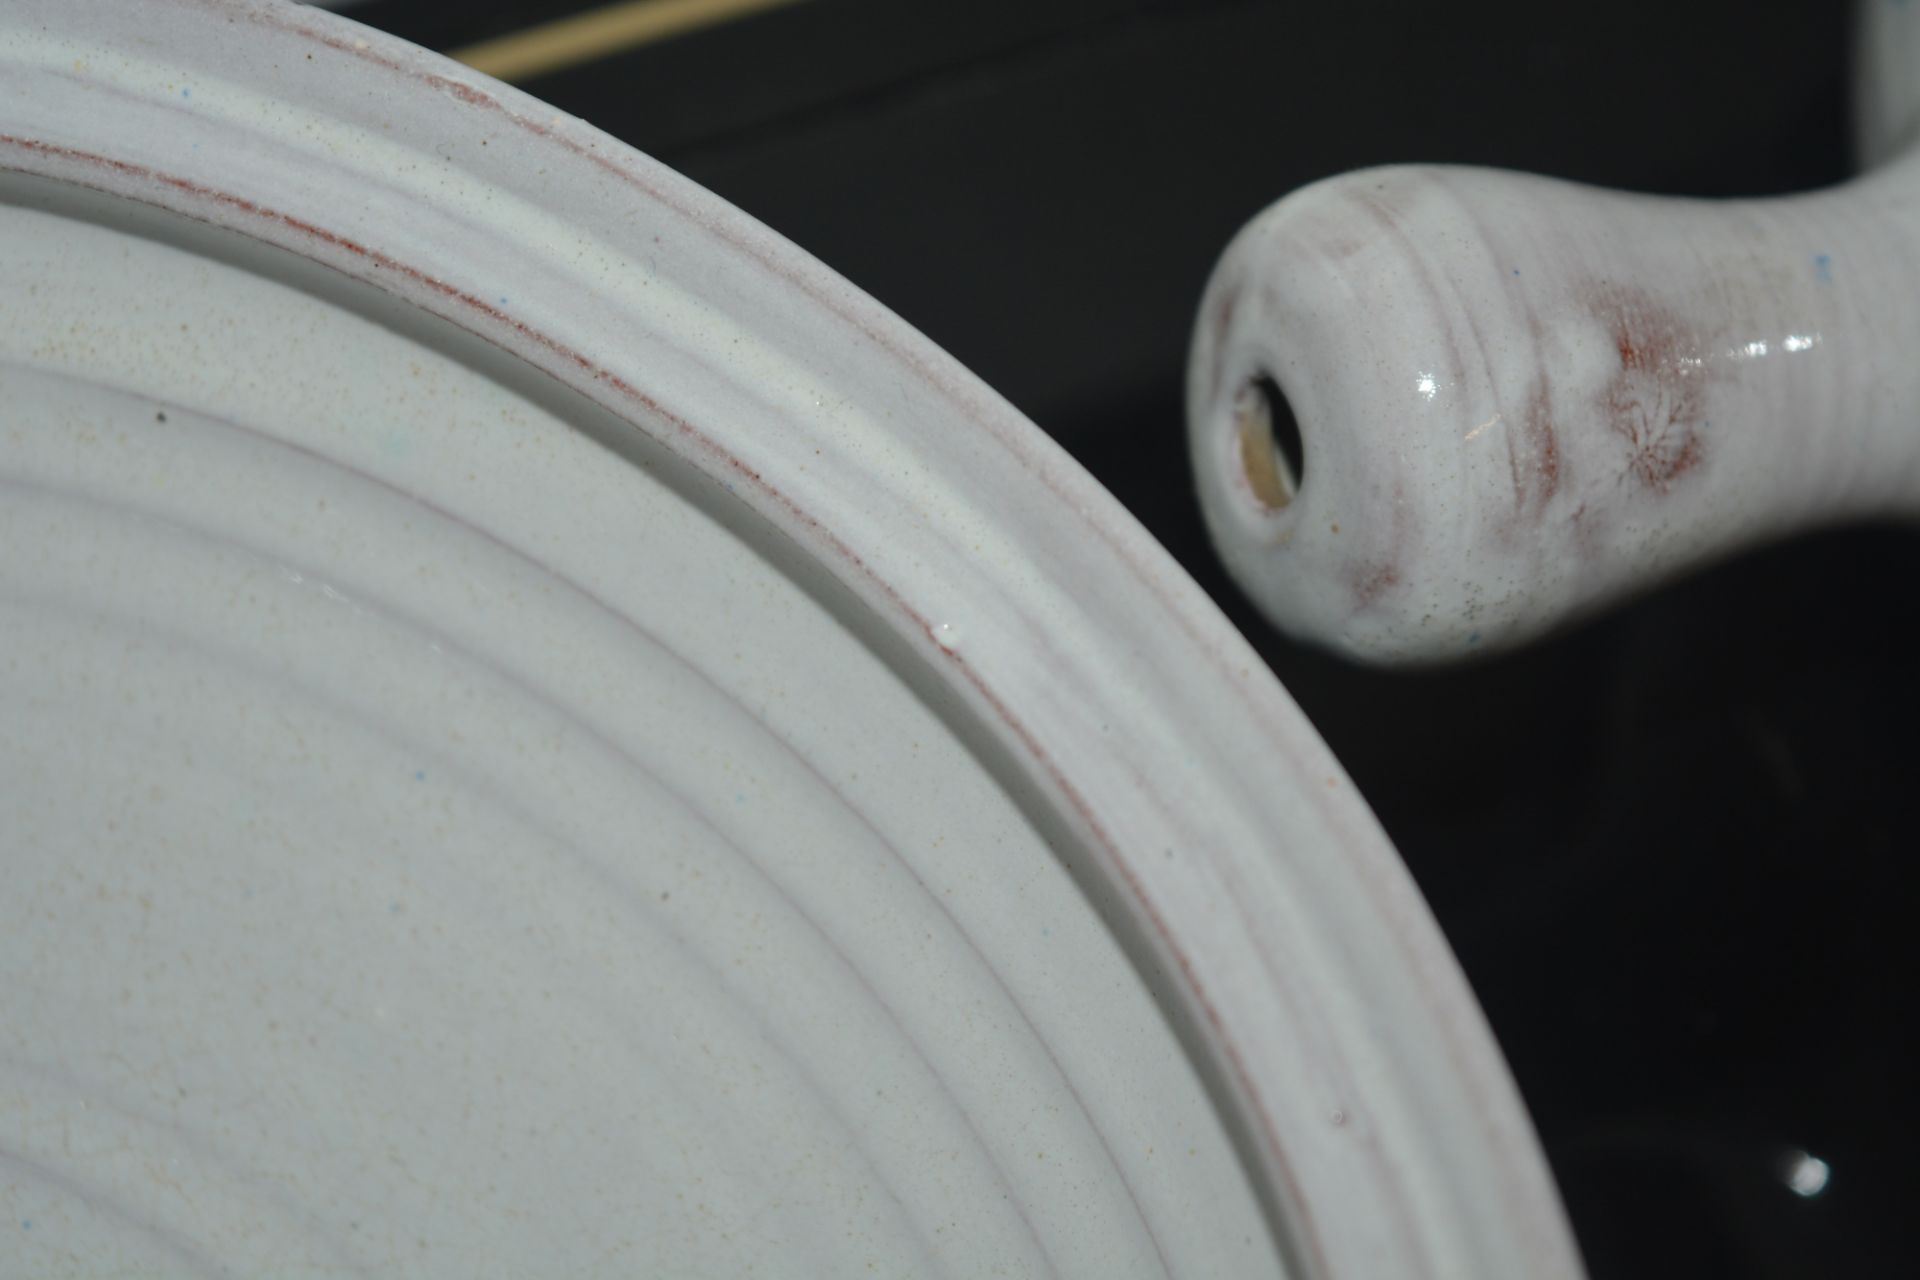 Alan Caiger-Smith (1930-2020) at Aldermaston Pottery tin-glazed earthenware dinner service, to - Image 5 of 21